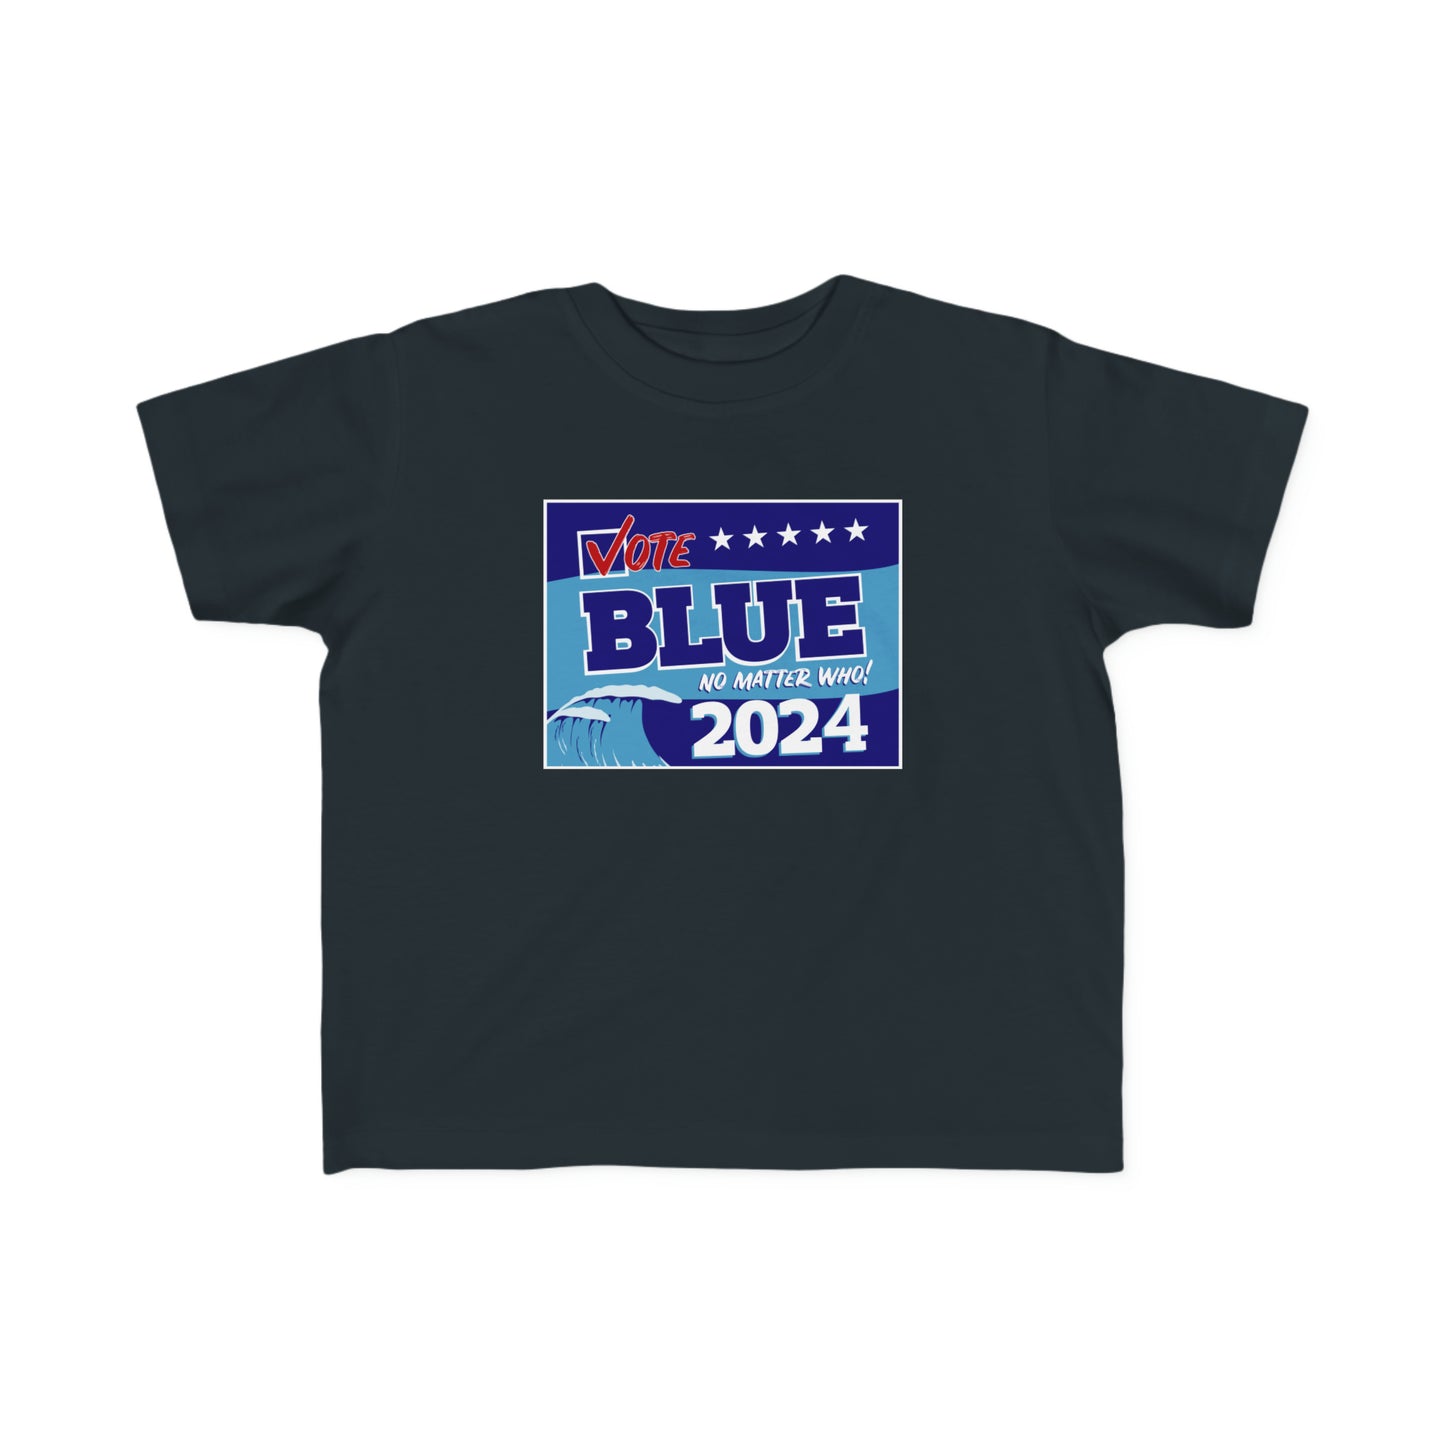 “Vote Blue No Matter Who, Blue Wave 2024” Toddler's Tee